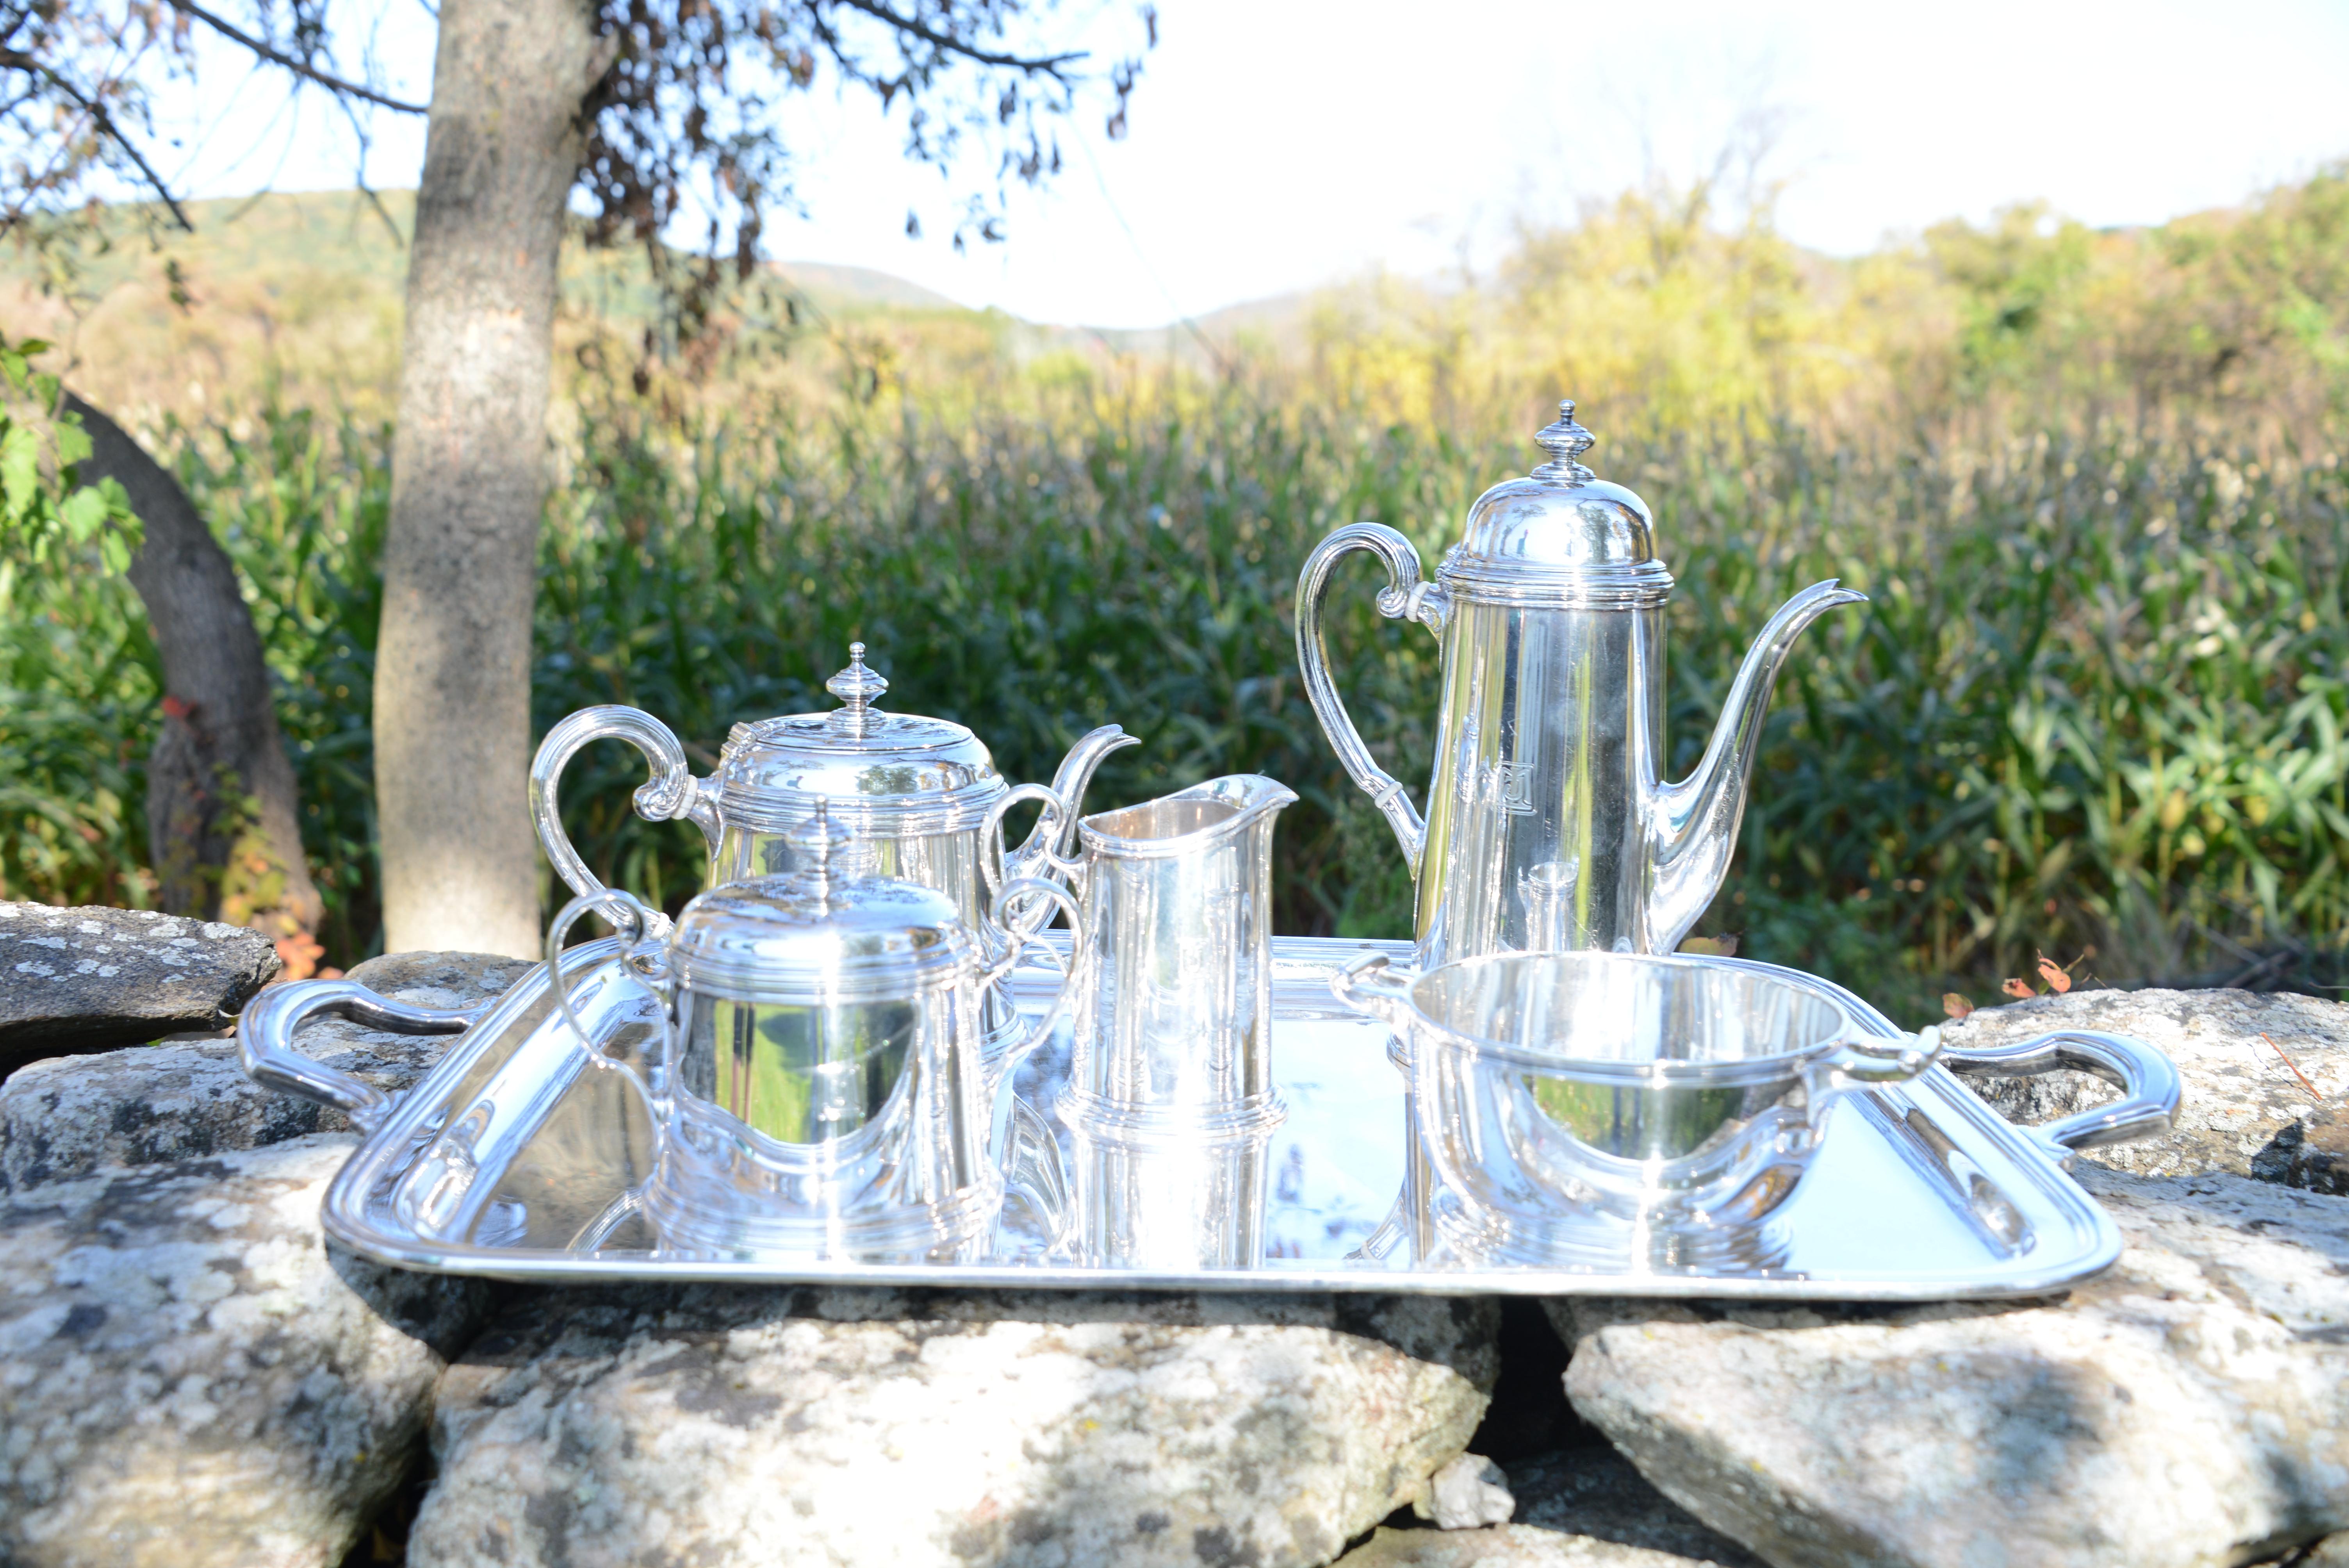 The 6 pieces of this beautiful Tiffany & Co set include a tall coffee pot, a shorter tea pot, open creamer, lidded sugar bowl, waste bowl and a rectangular tray with handles. All pieces except the tray are marked with an M, representing manufacture